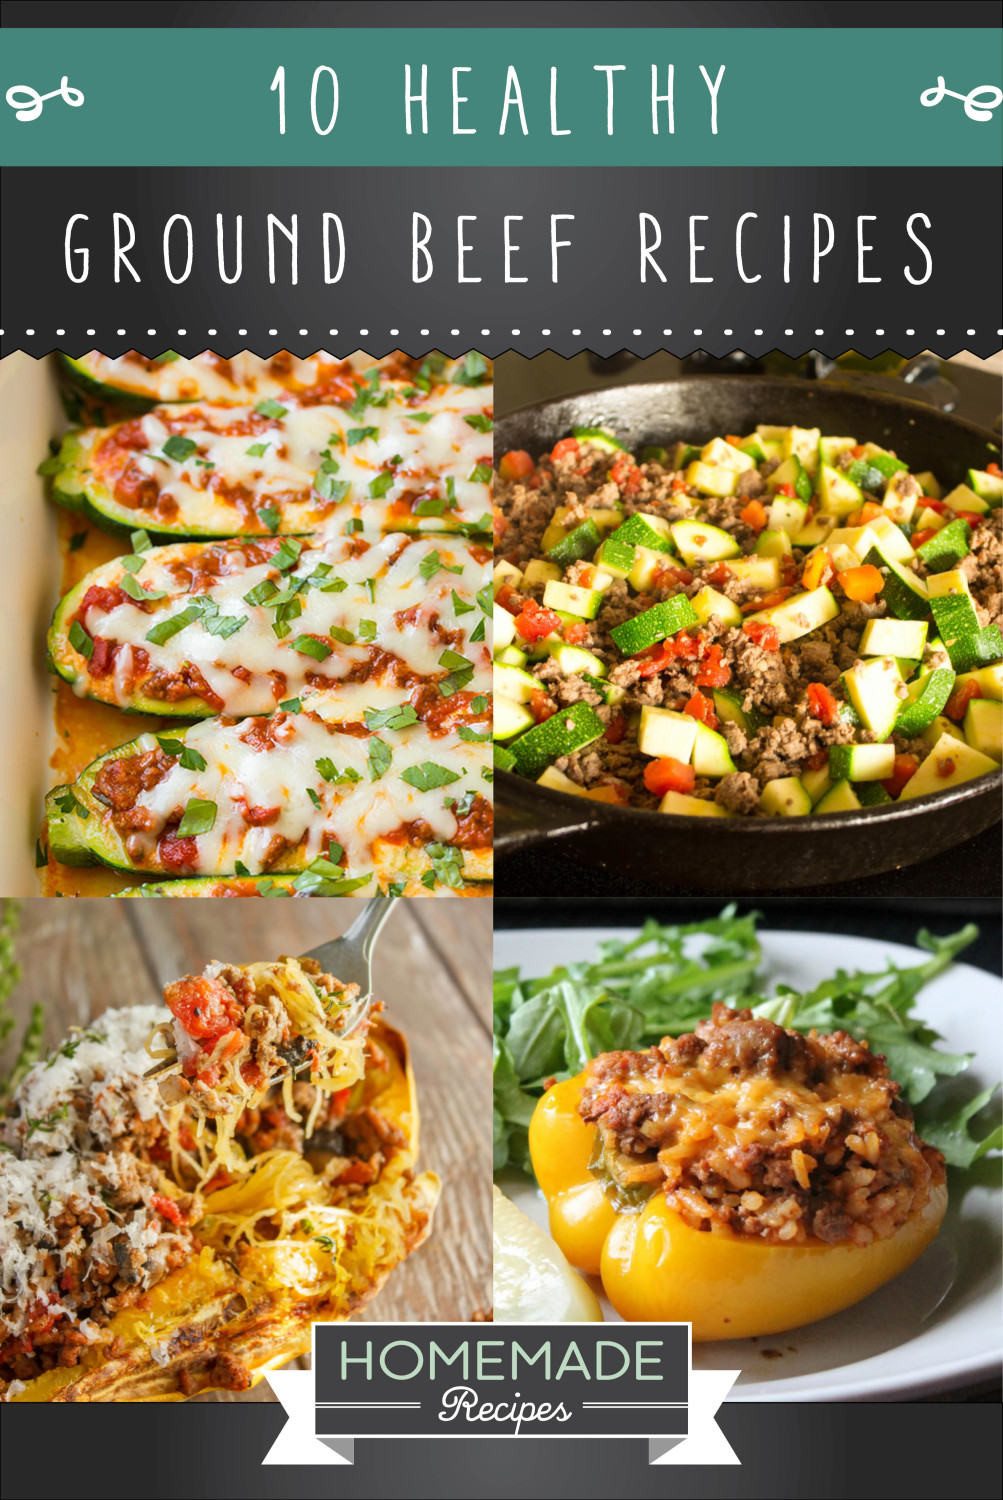 Healthy Recipes For Ground Beef
 10 Healthy Ground Beef Recipes